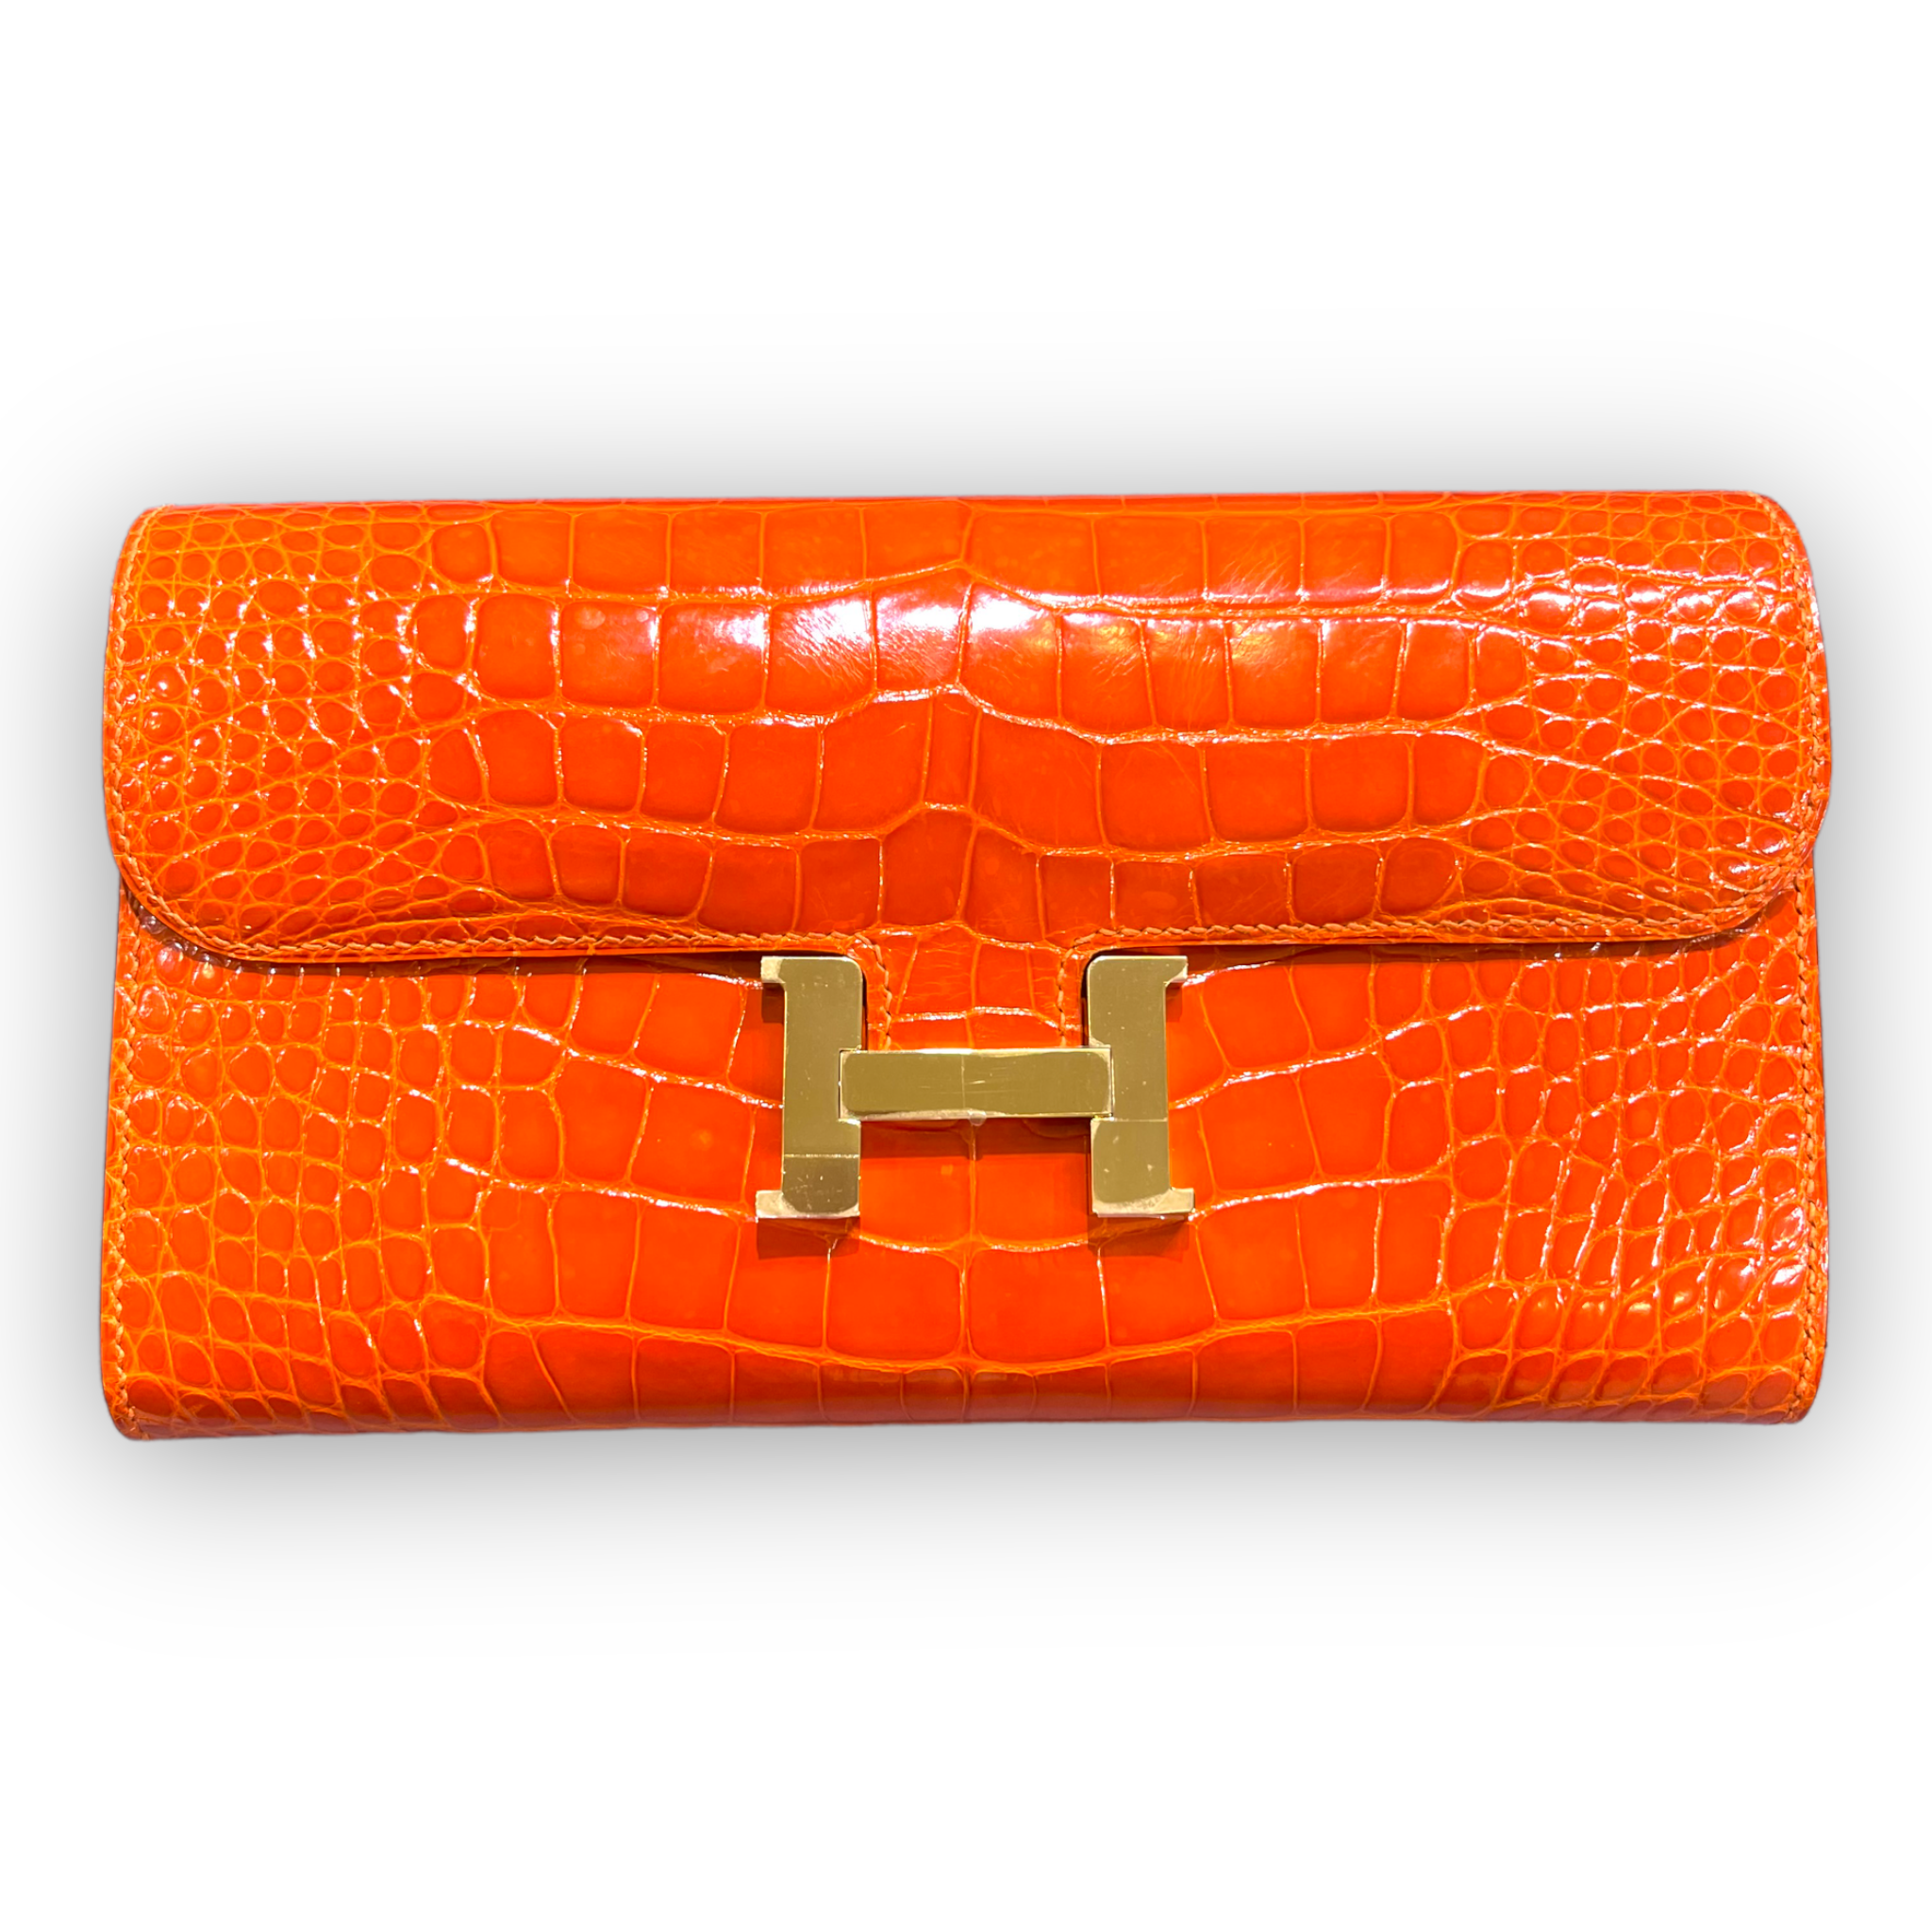 HERMES CONSTANCE Leather Long Wallets